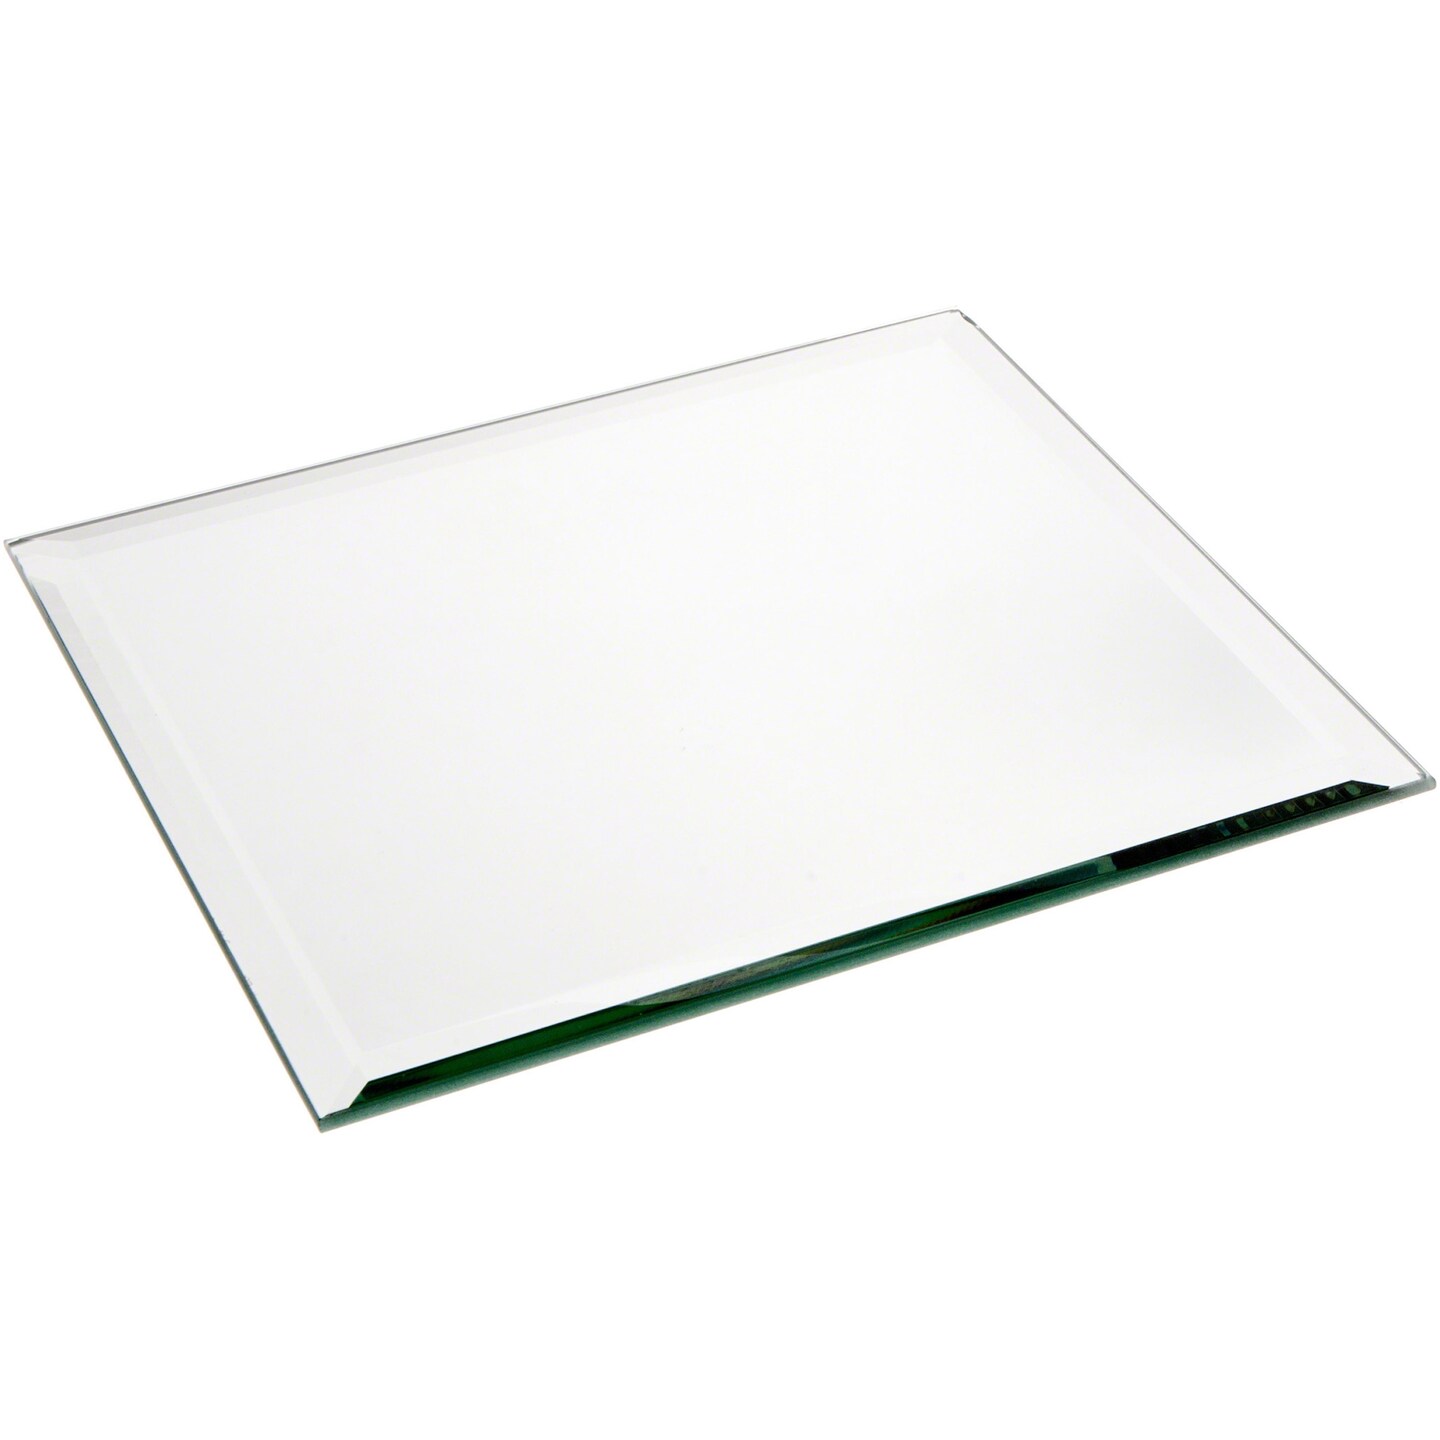 Plymor Square 5mm Beveled Glass Mirror, 8 inch x 8 inch